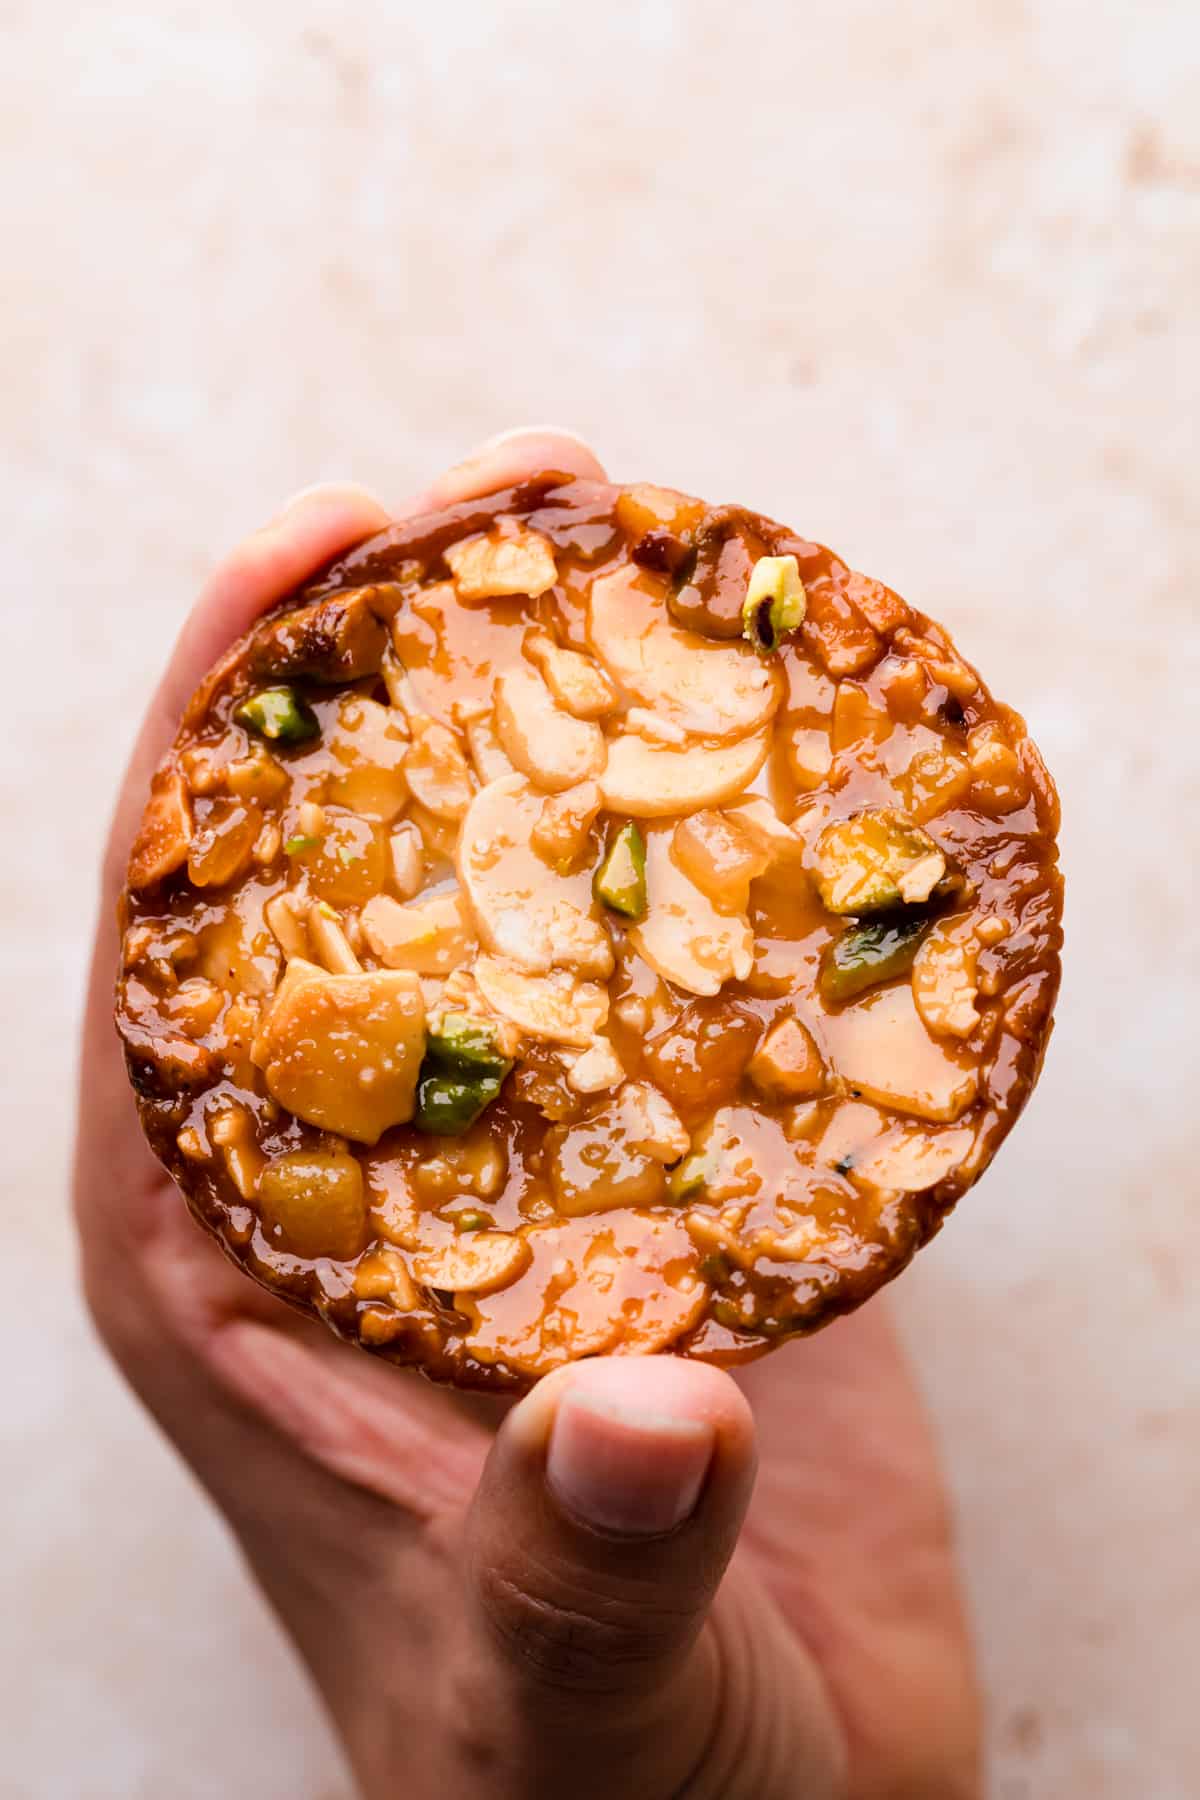 individual almond florentine cookie with pistachio nuts and fruit peel being held by hand.